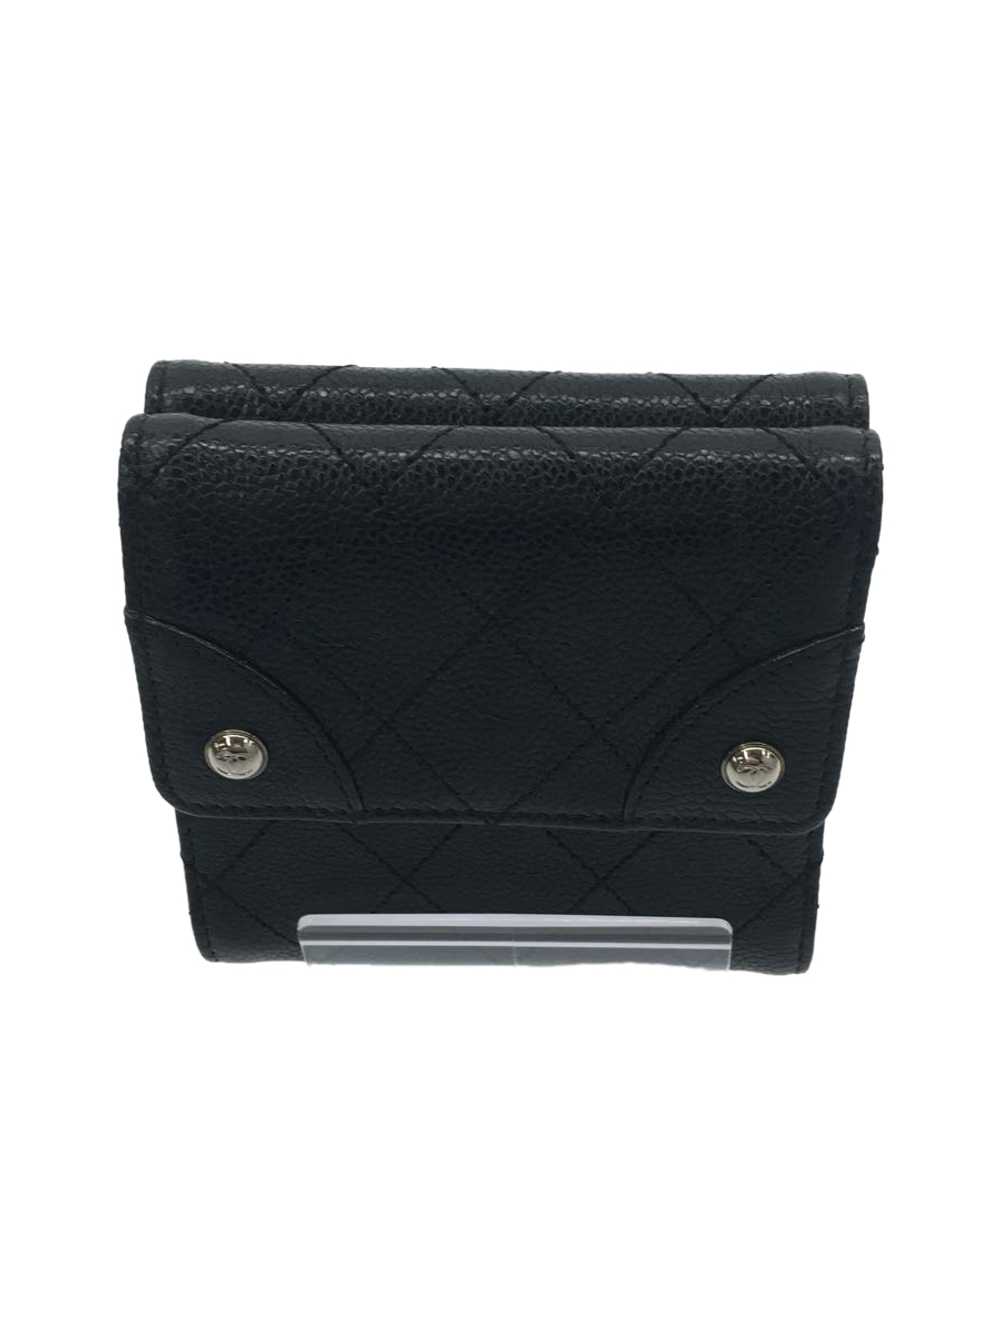 [Used in Japan Wallet] Used Chanel Wallet Purchas… - image 1